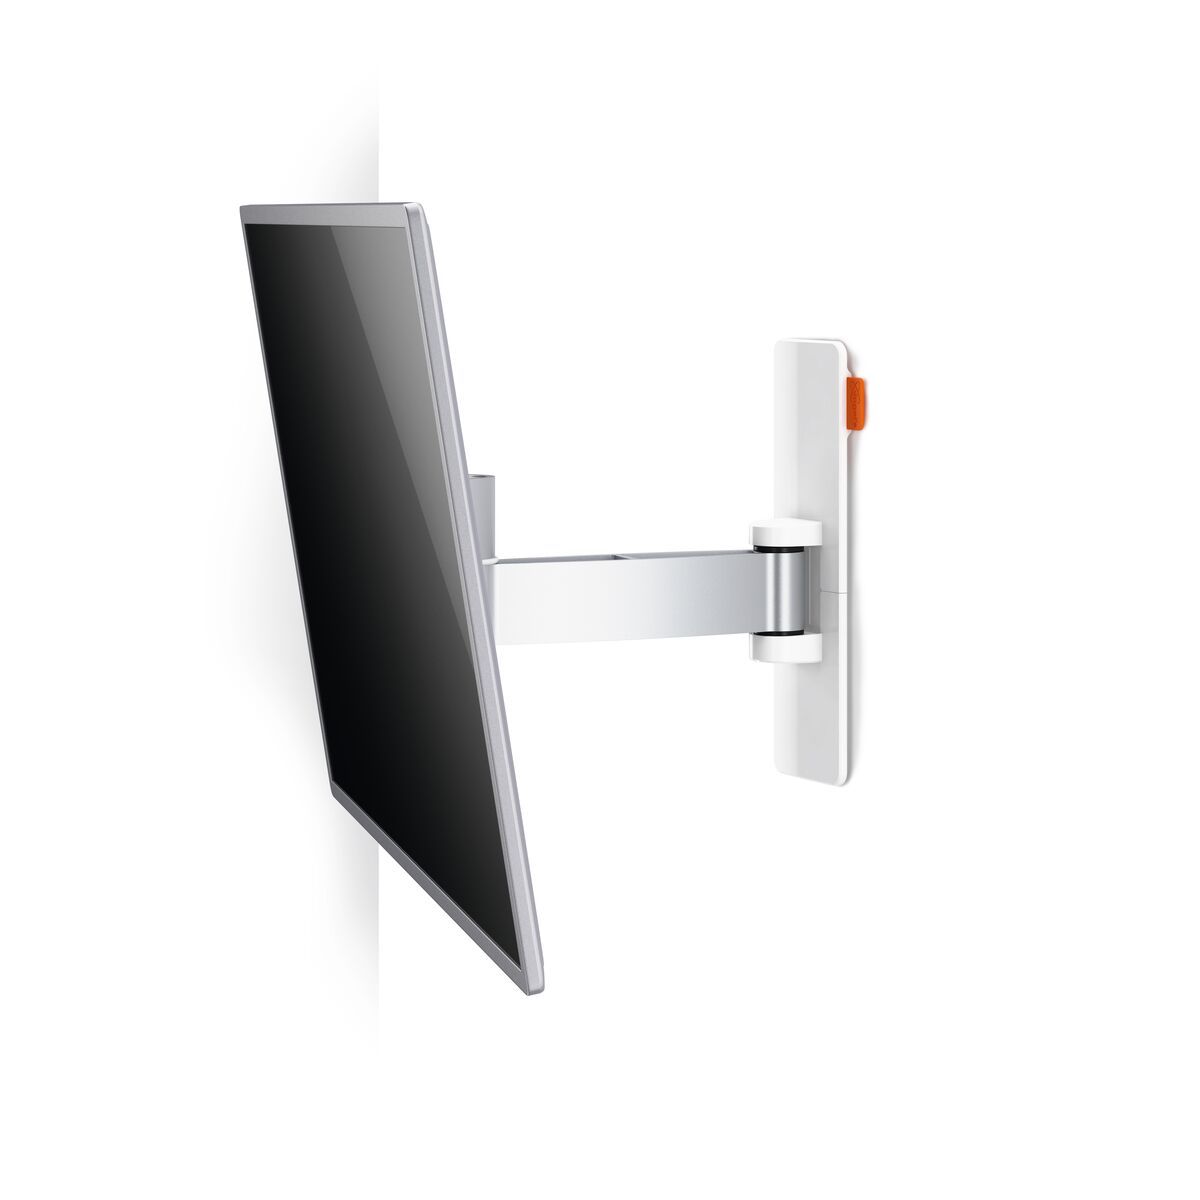 Vogel's WALL 2125 Full-Motion TV Wall Mount (white) - Suitable for 19 up to 40 inch TVs - Motion (up to 120°) - Tilt -10°/+10° - Detail